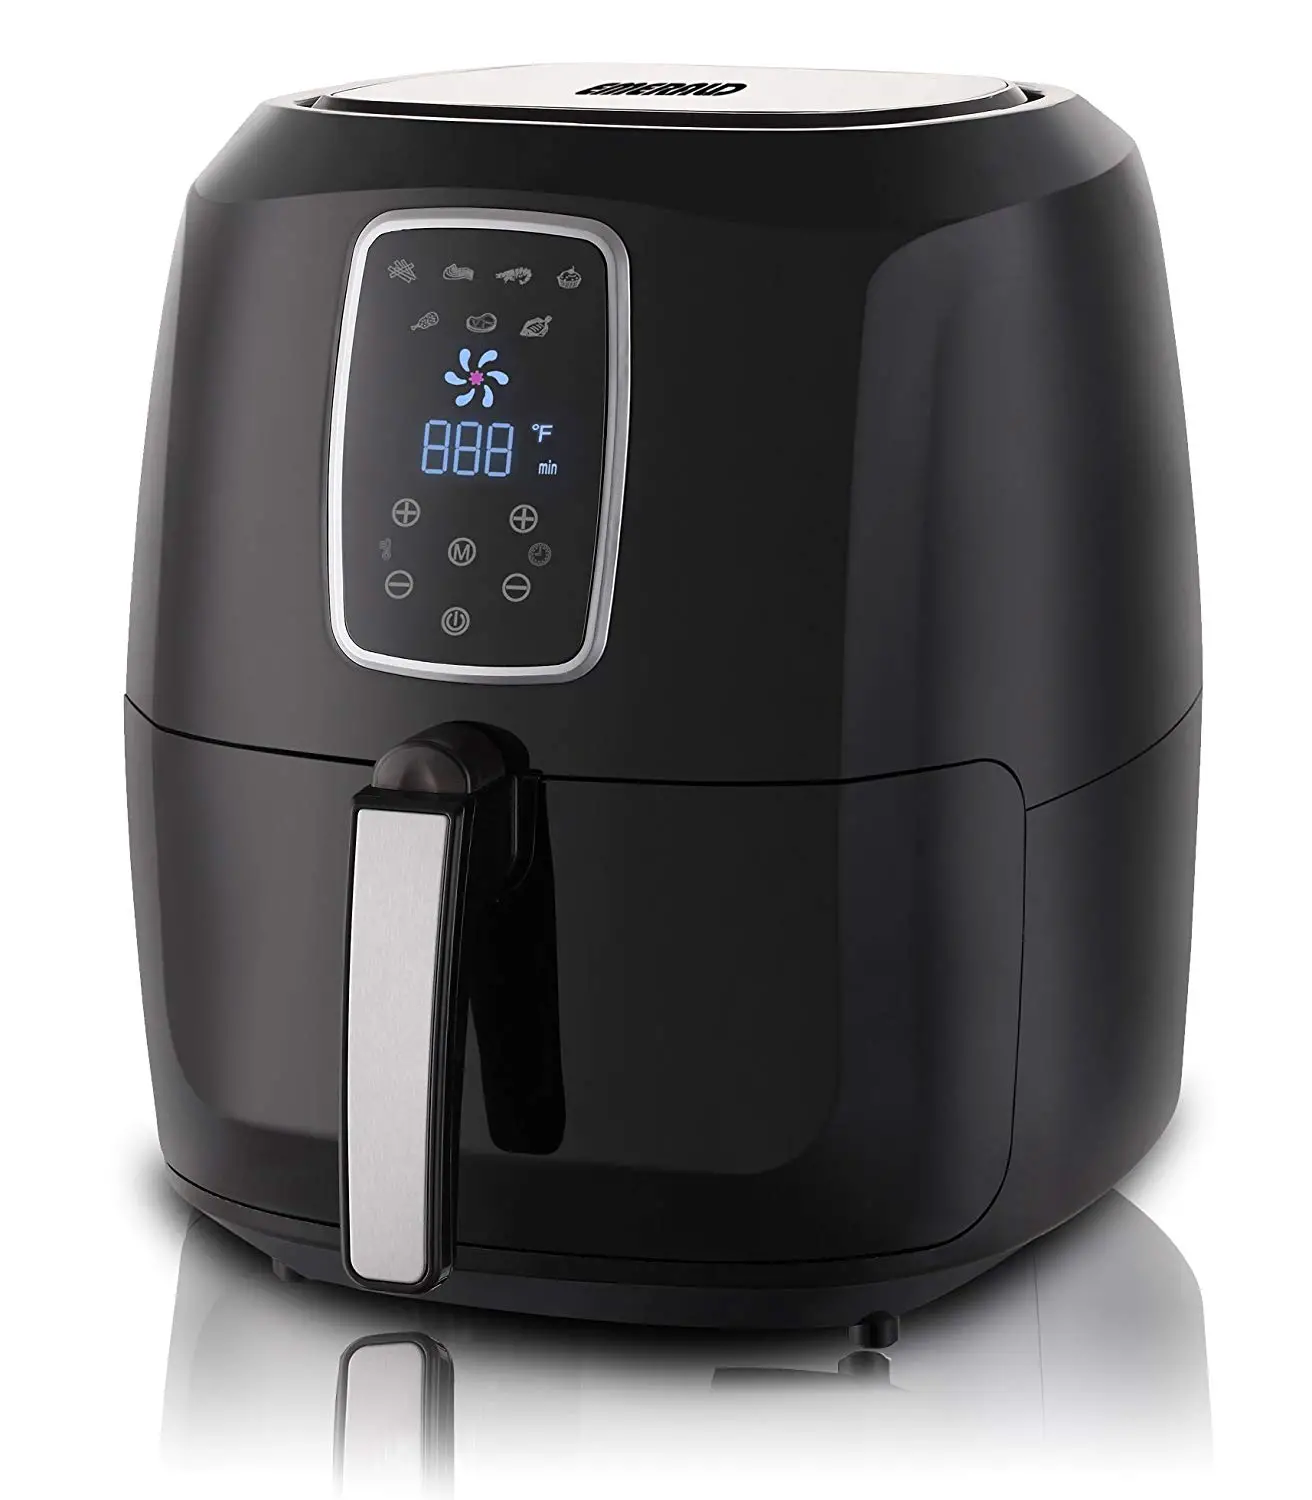 Top Rated Emerald Air Fryer from Amazon